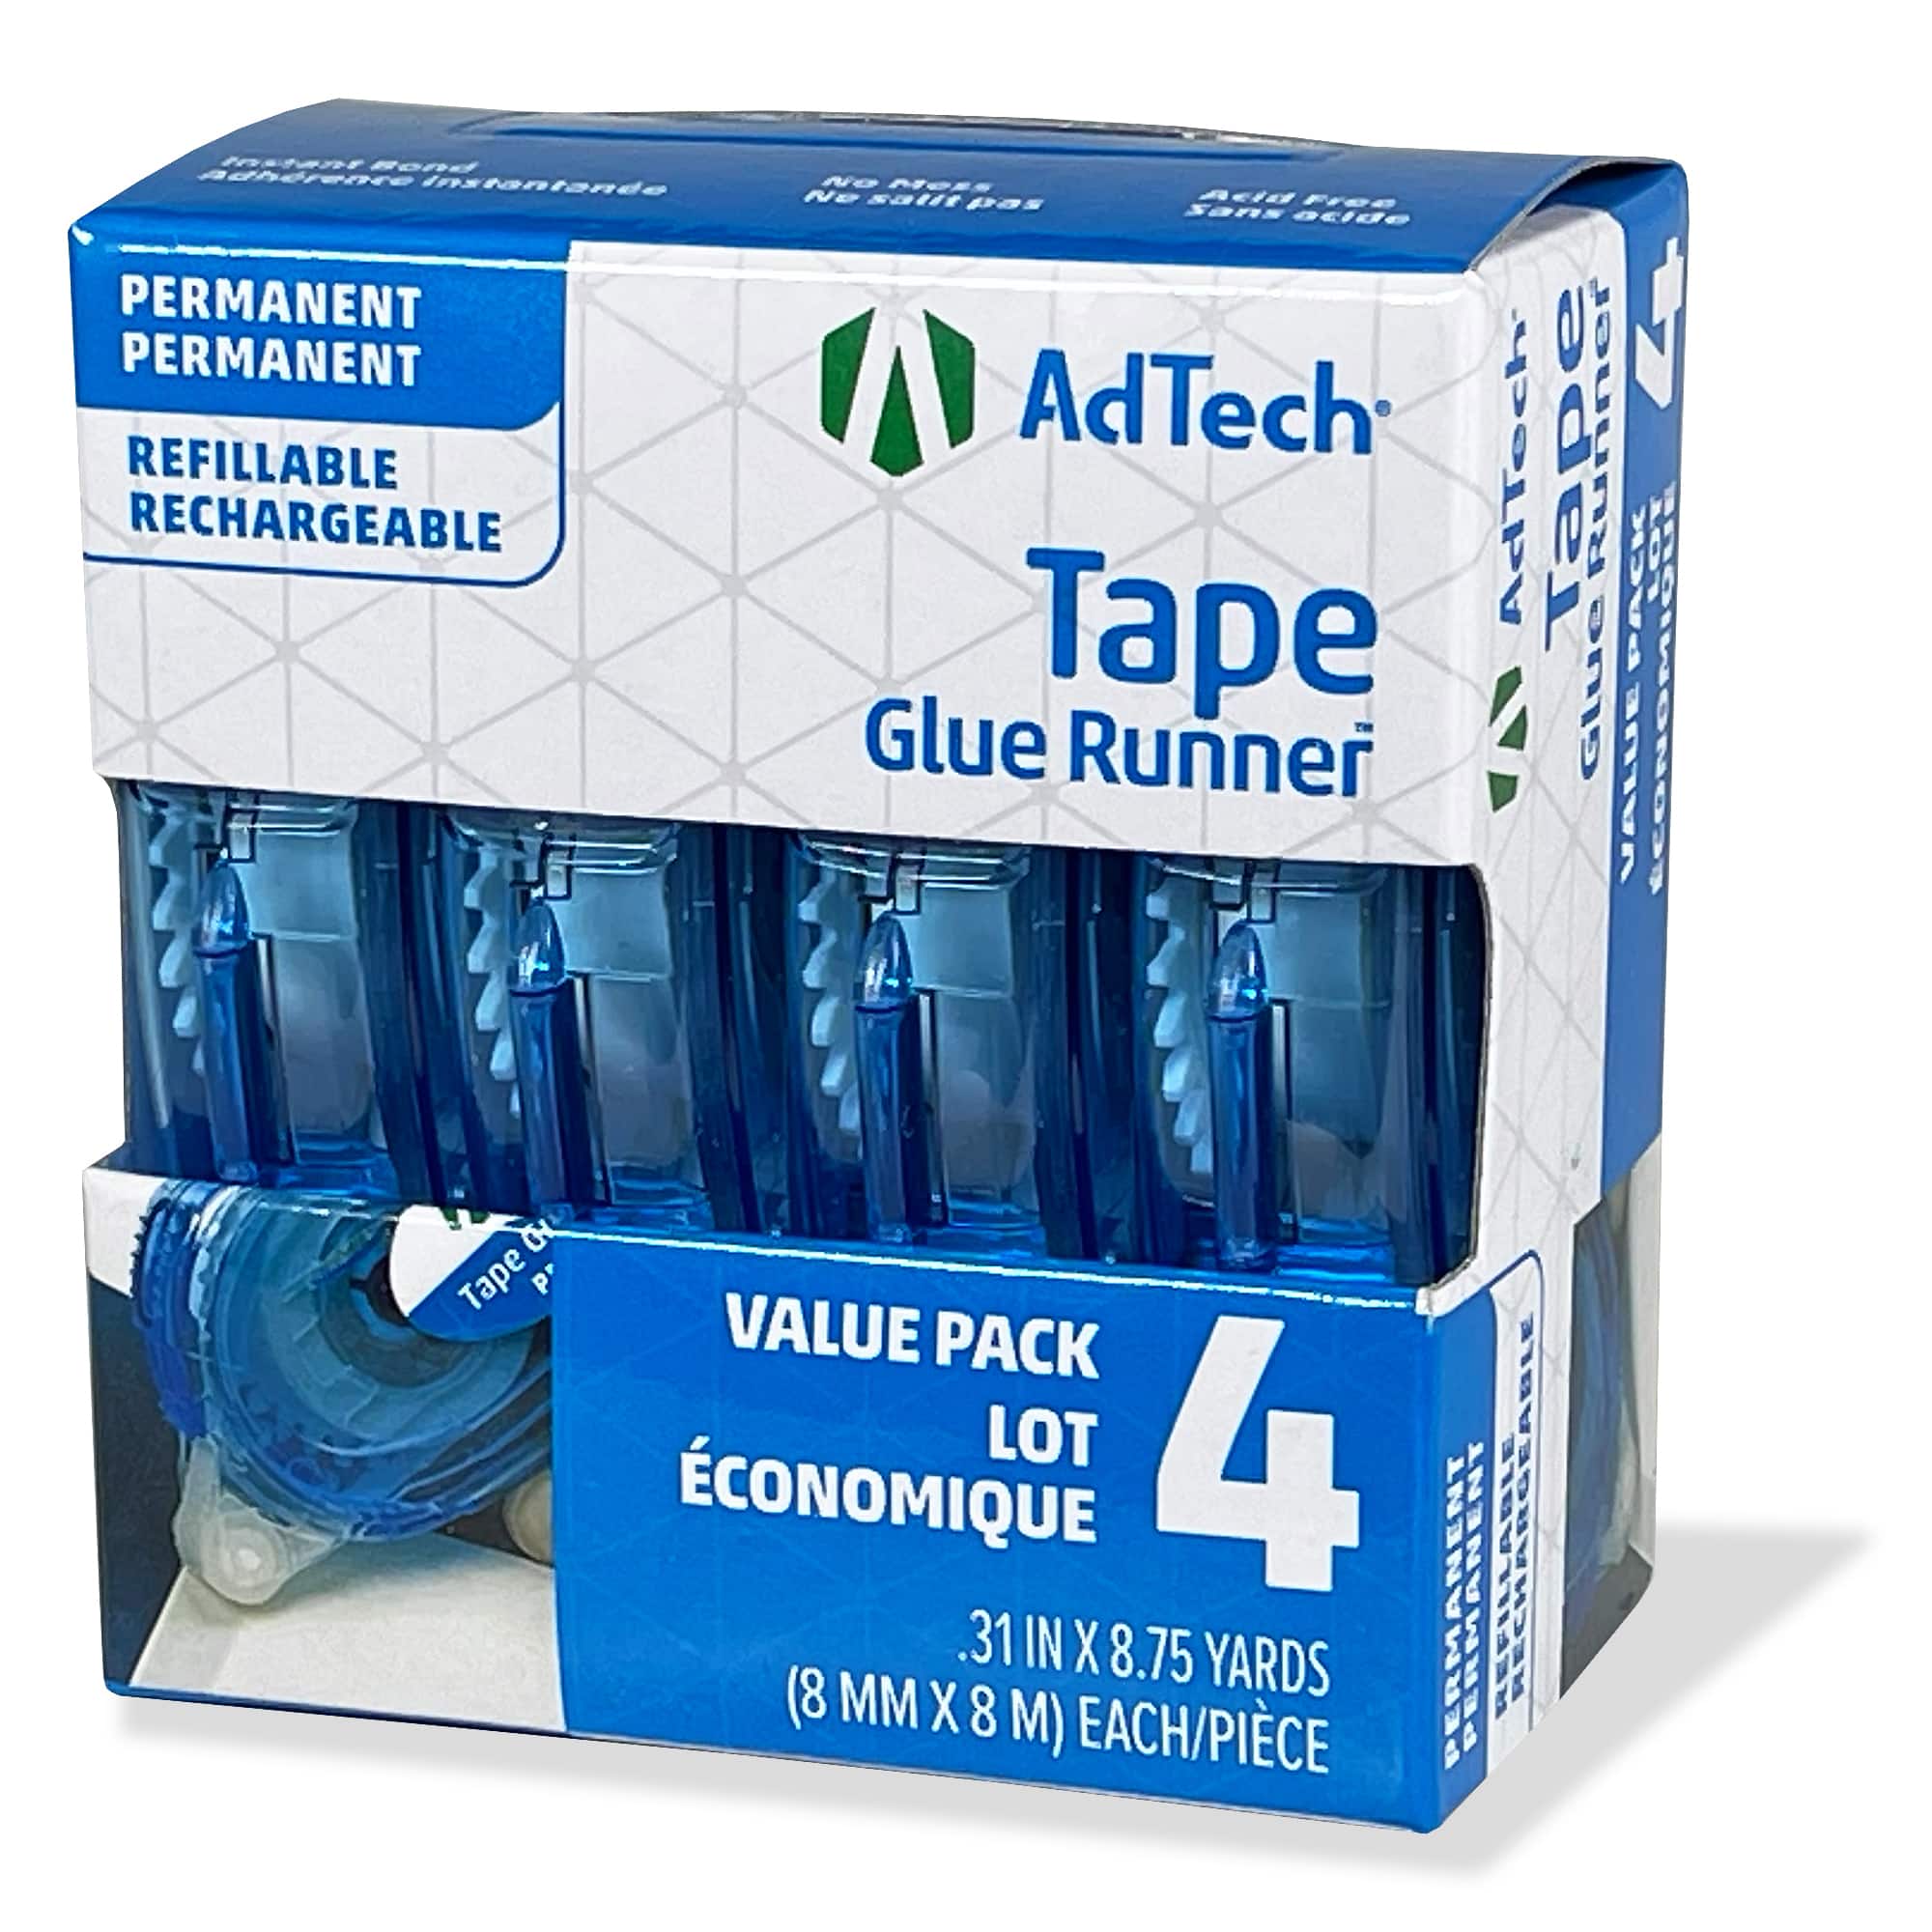 Adtech Removable Tape Glue Runner, 4ct., Size: 0.31 x 8.75yd, Other